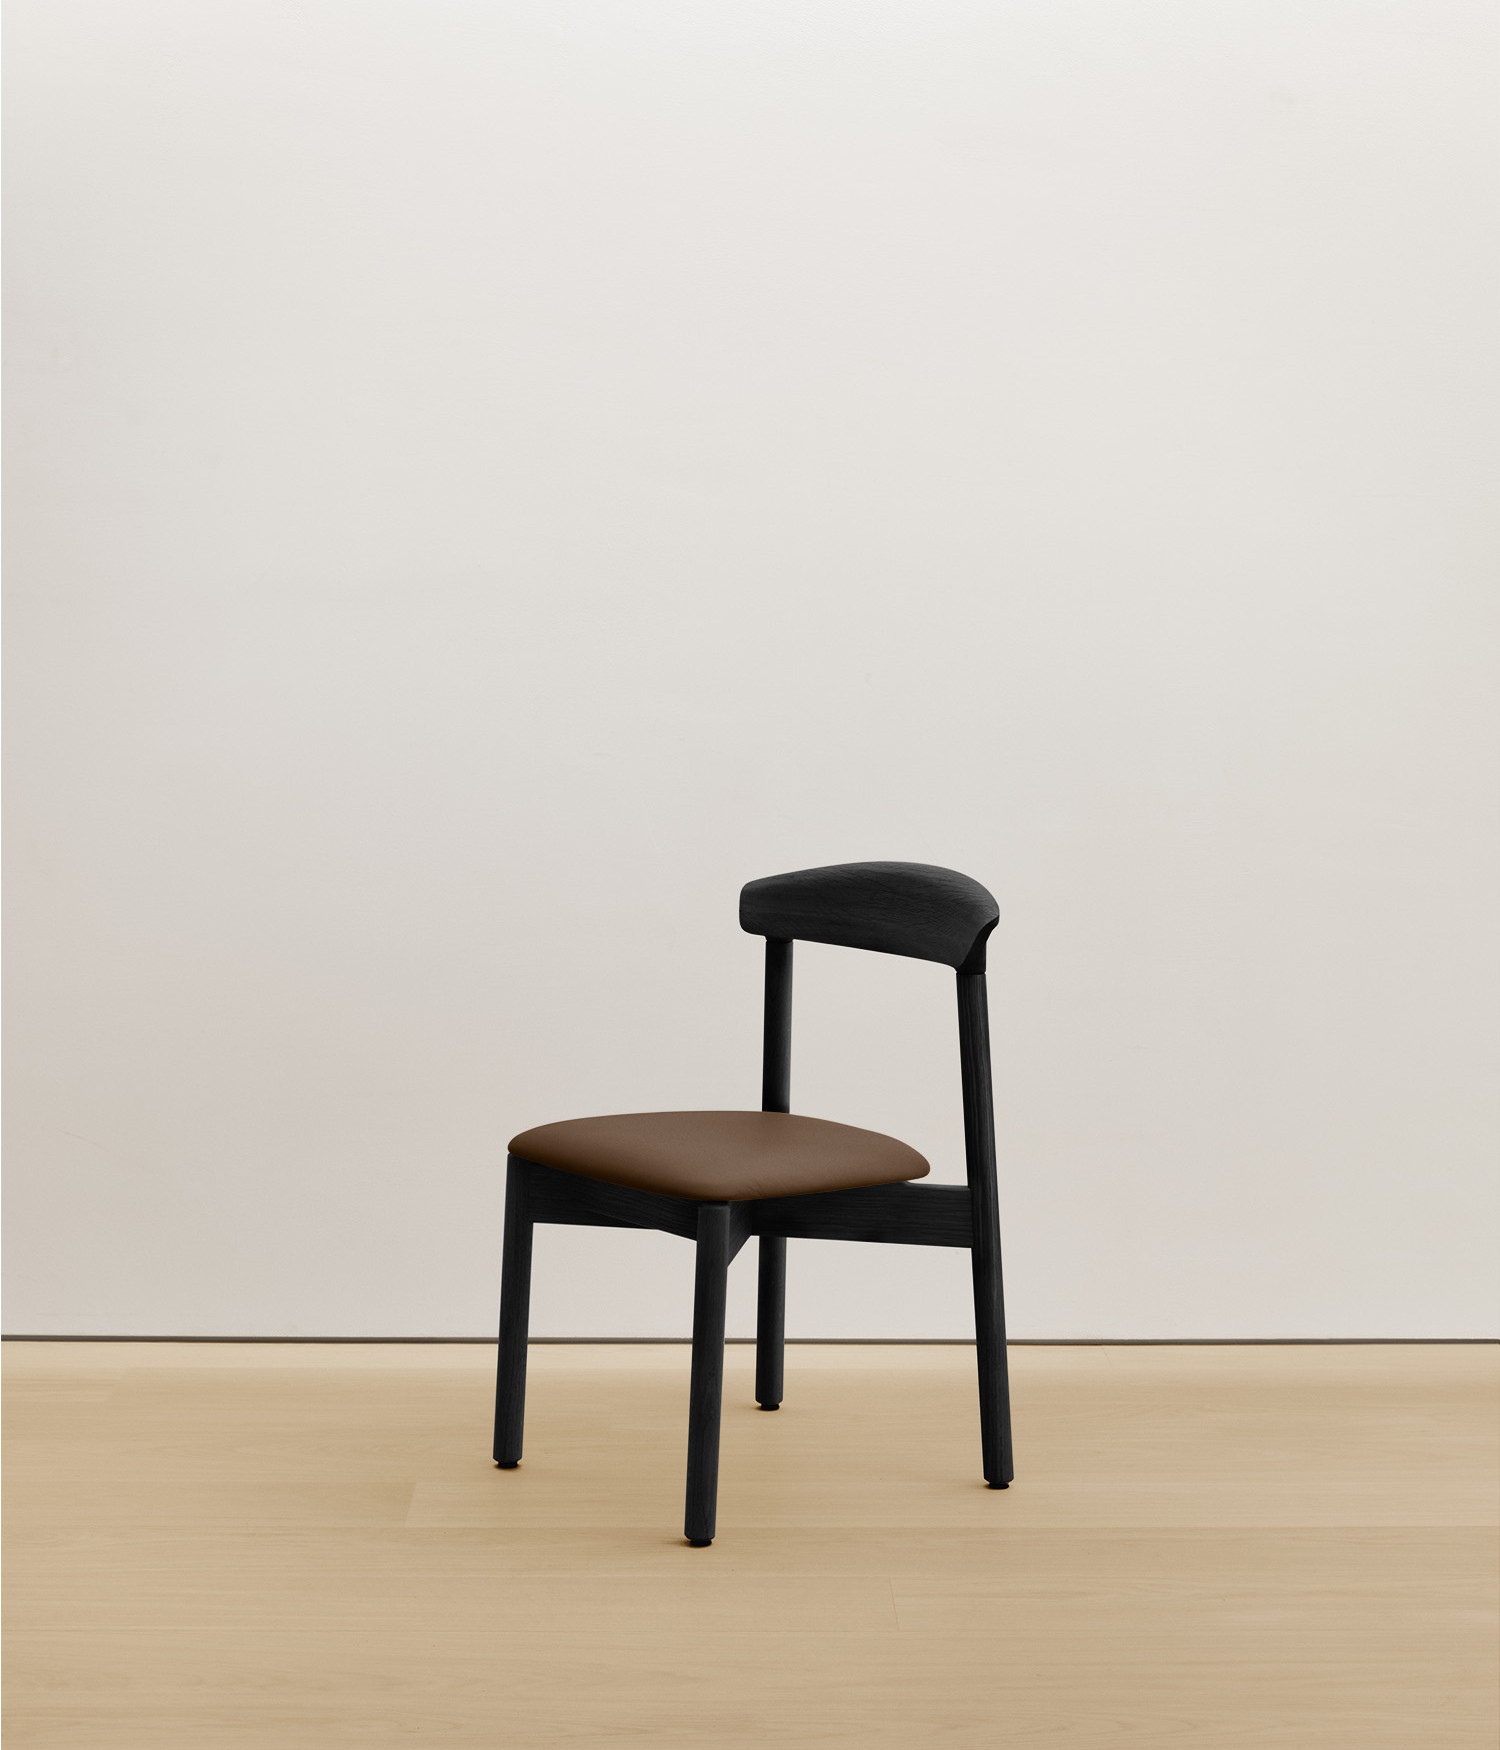  black-stained-oak chair with umber color upholstered seat